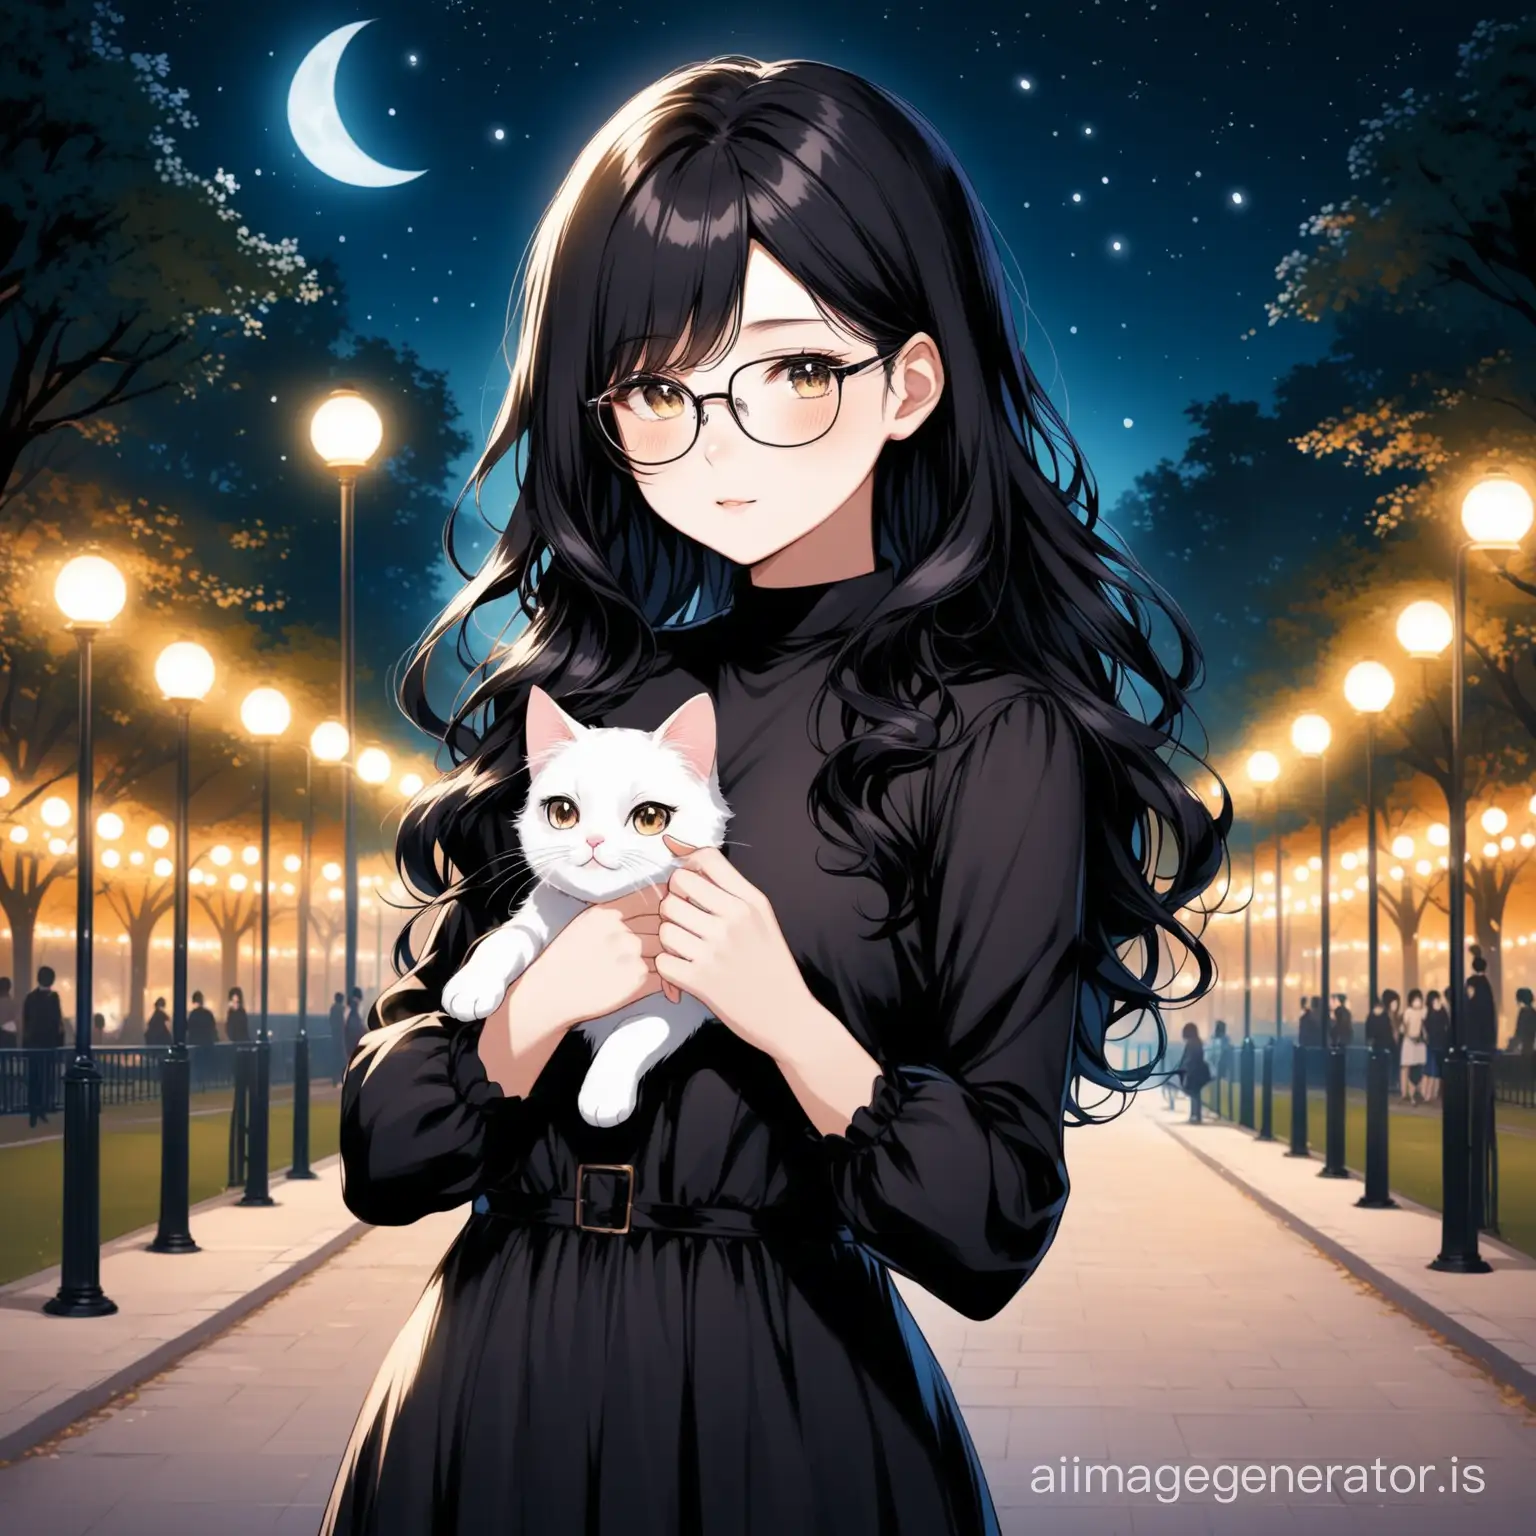 Girl-with-Black-Hair-and-White-Cat-in-Night-Park